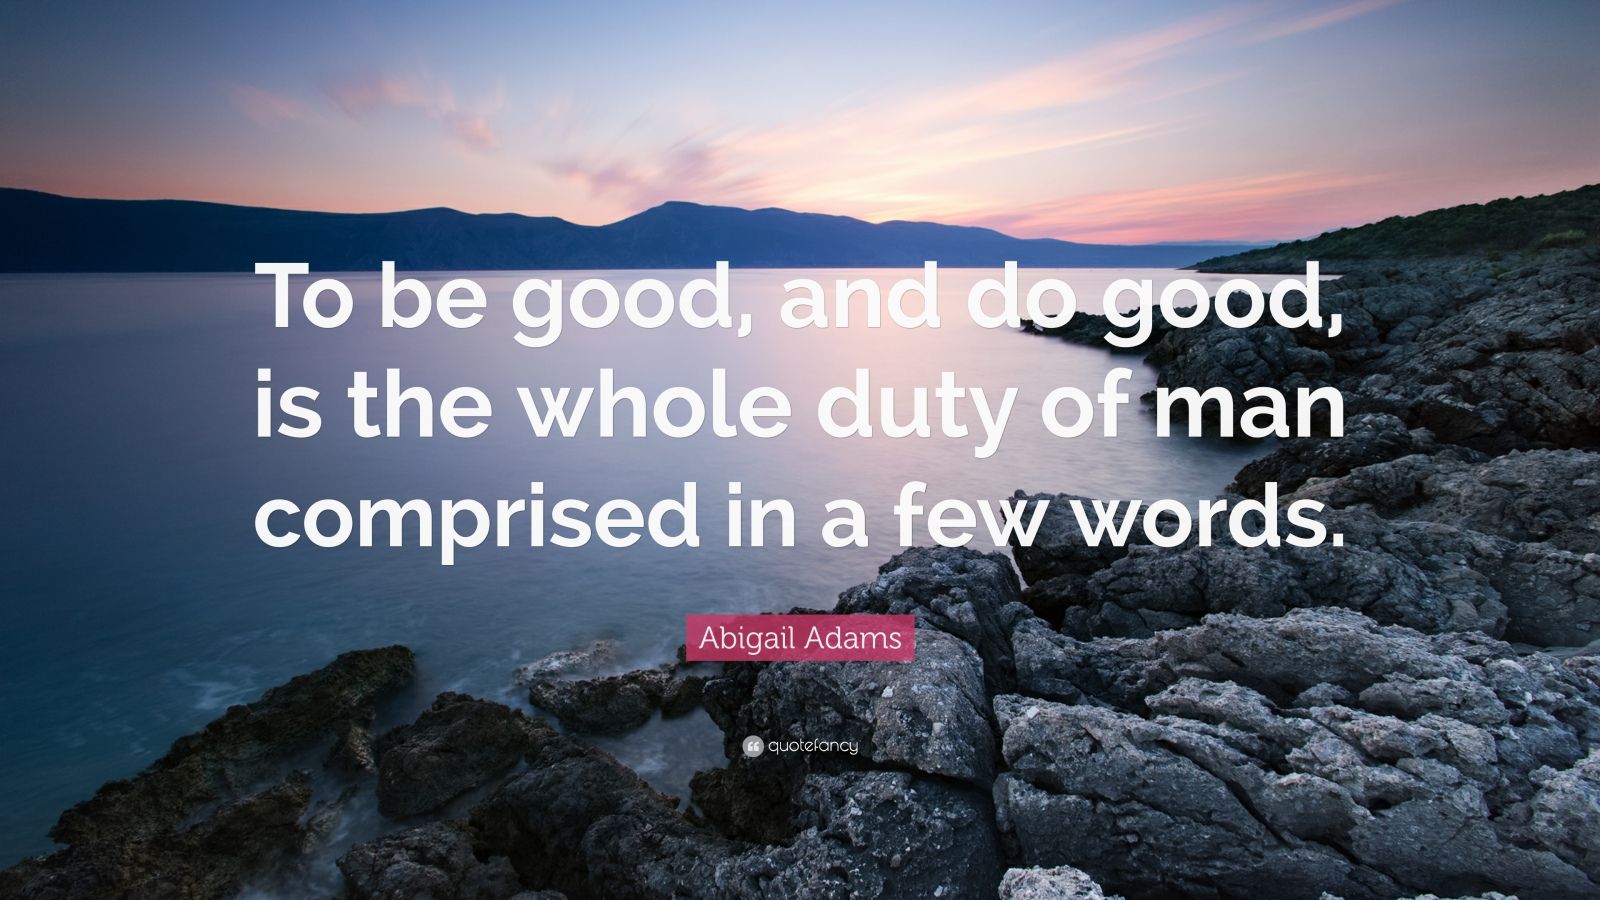 Abigail Adams Quote: "To be good, and do good, is the whole duty of man comprised in a few words ...